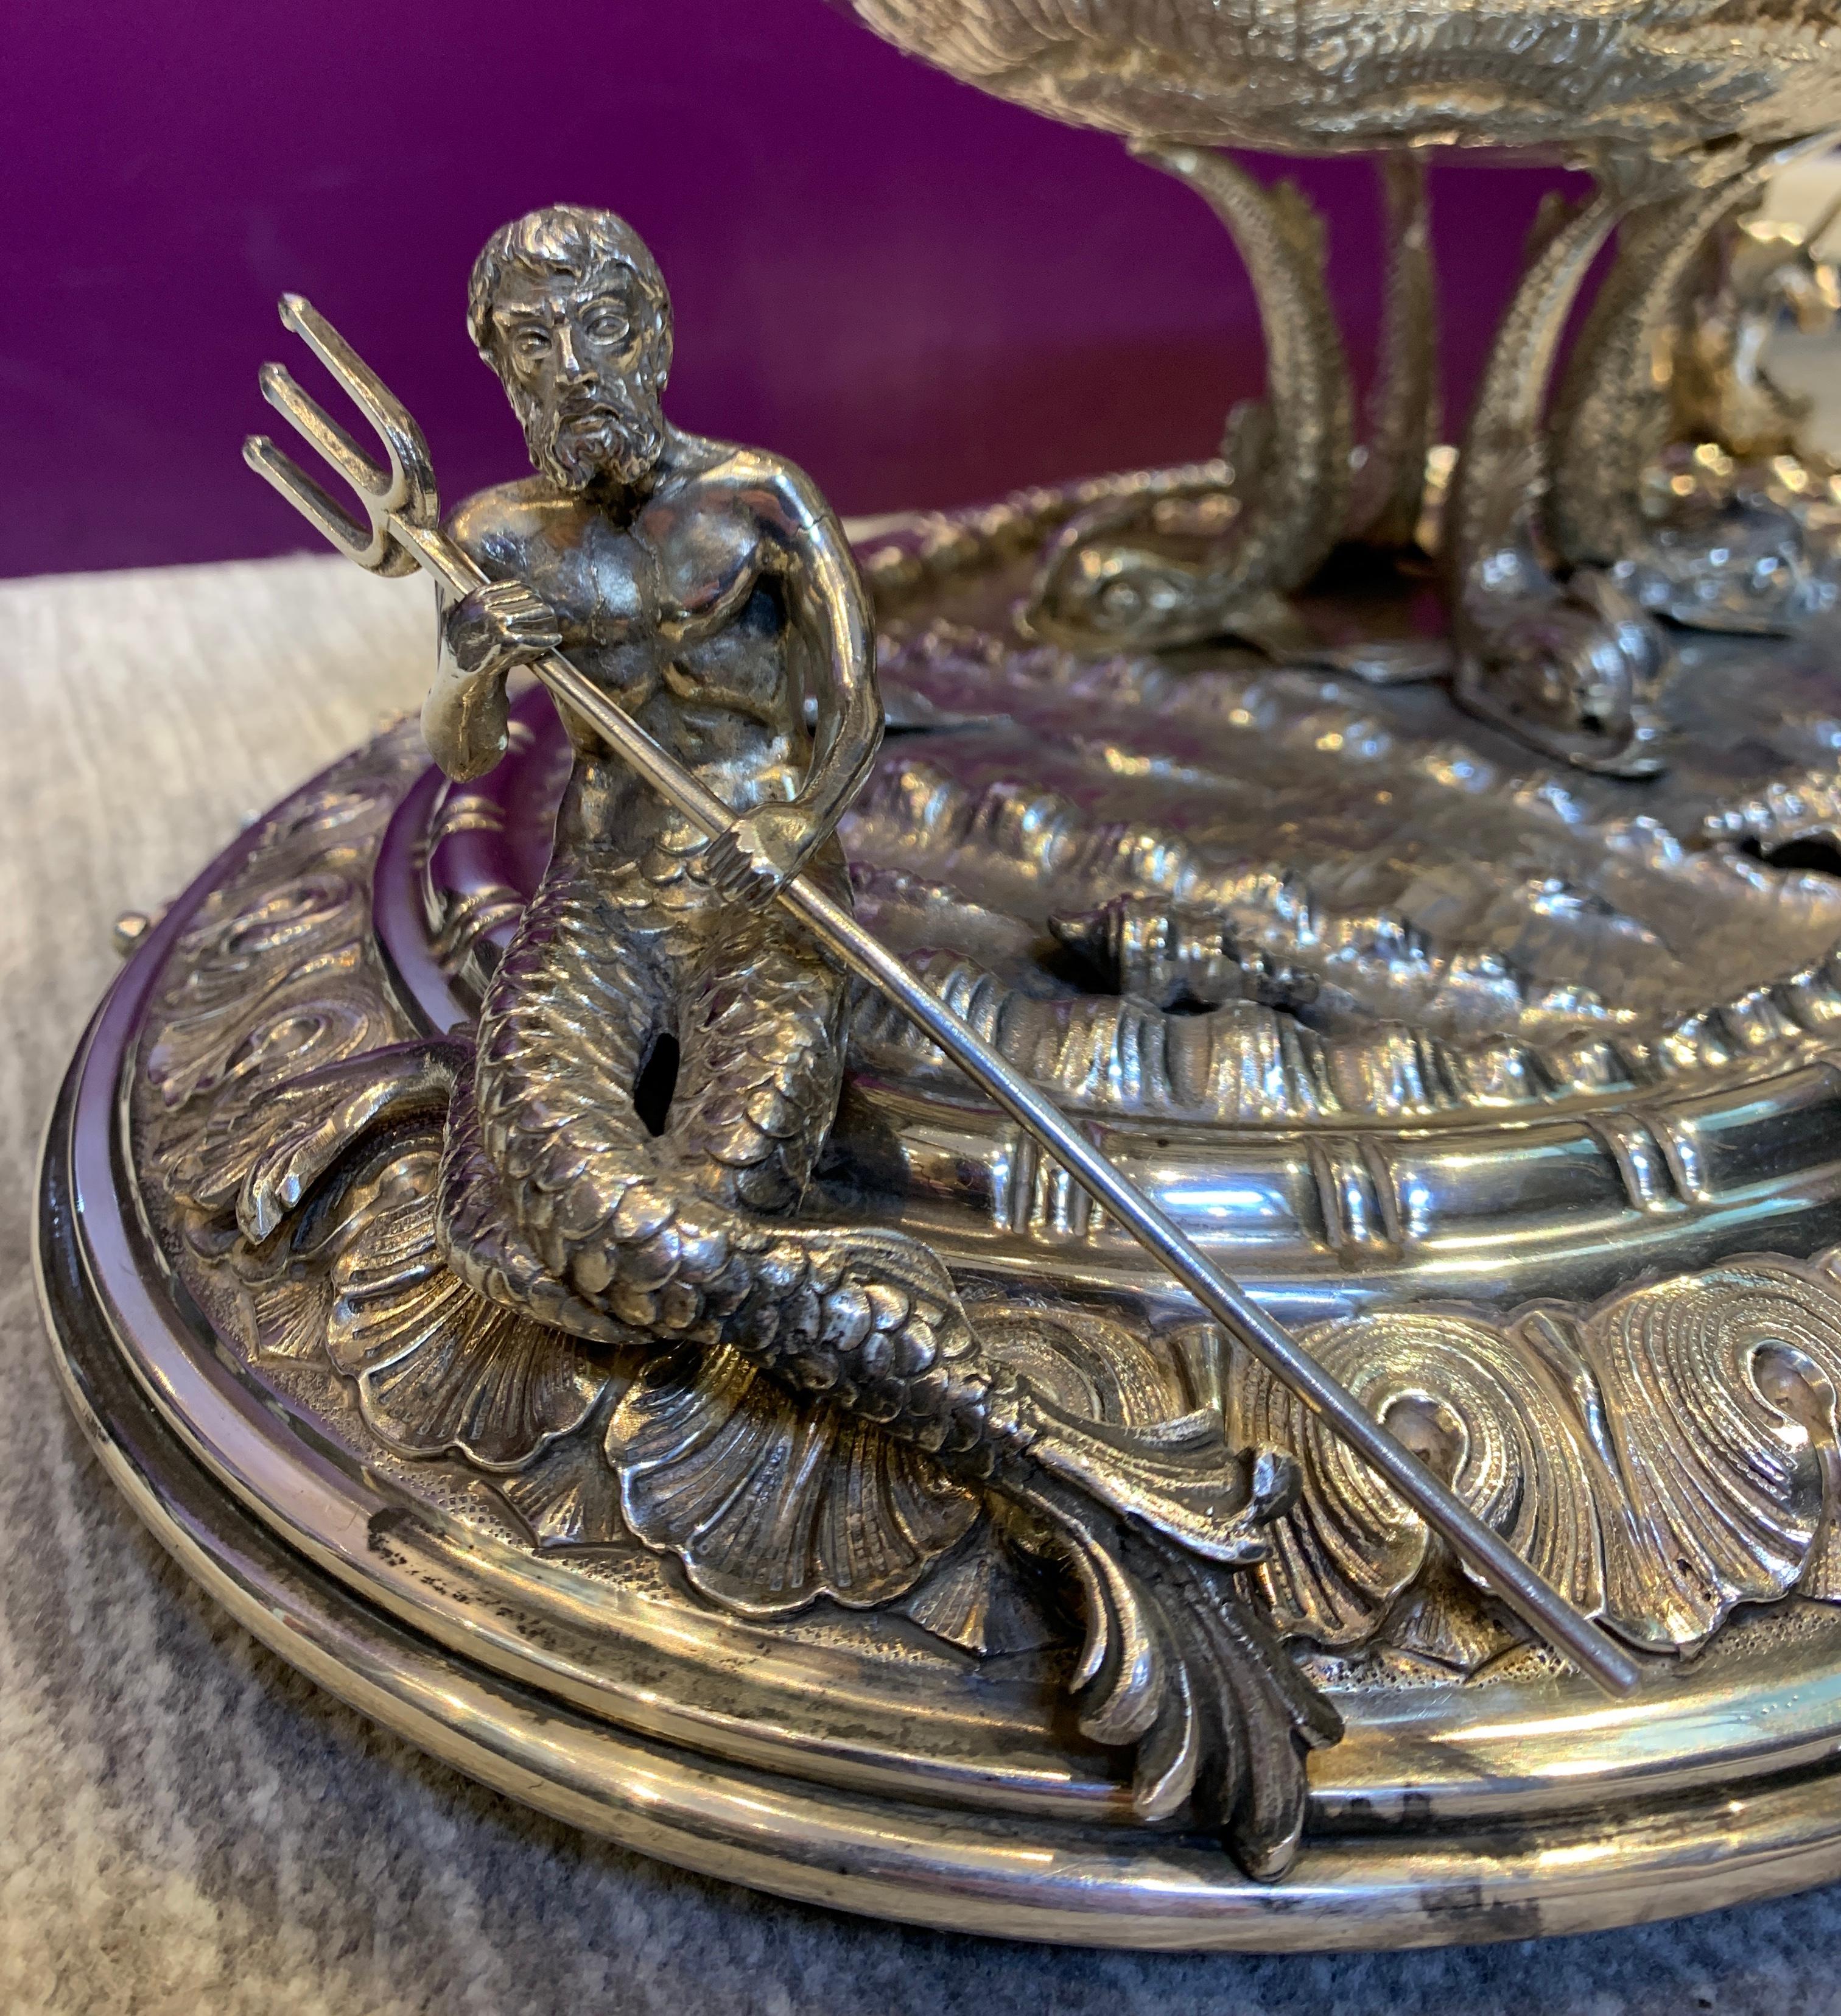 Exceptional Nautical Themed Silver Centerpiece by Buccellati In Excellent Condition For Sale In New York, NY